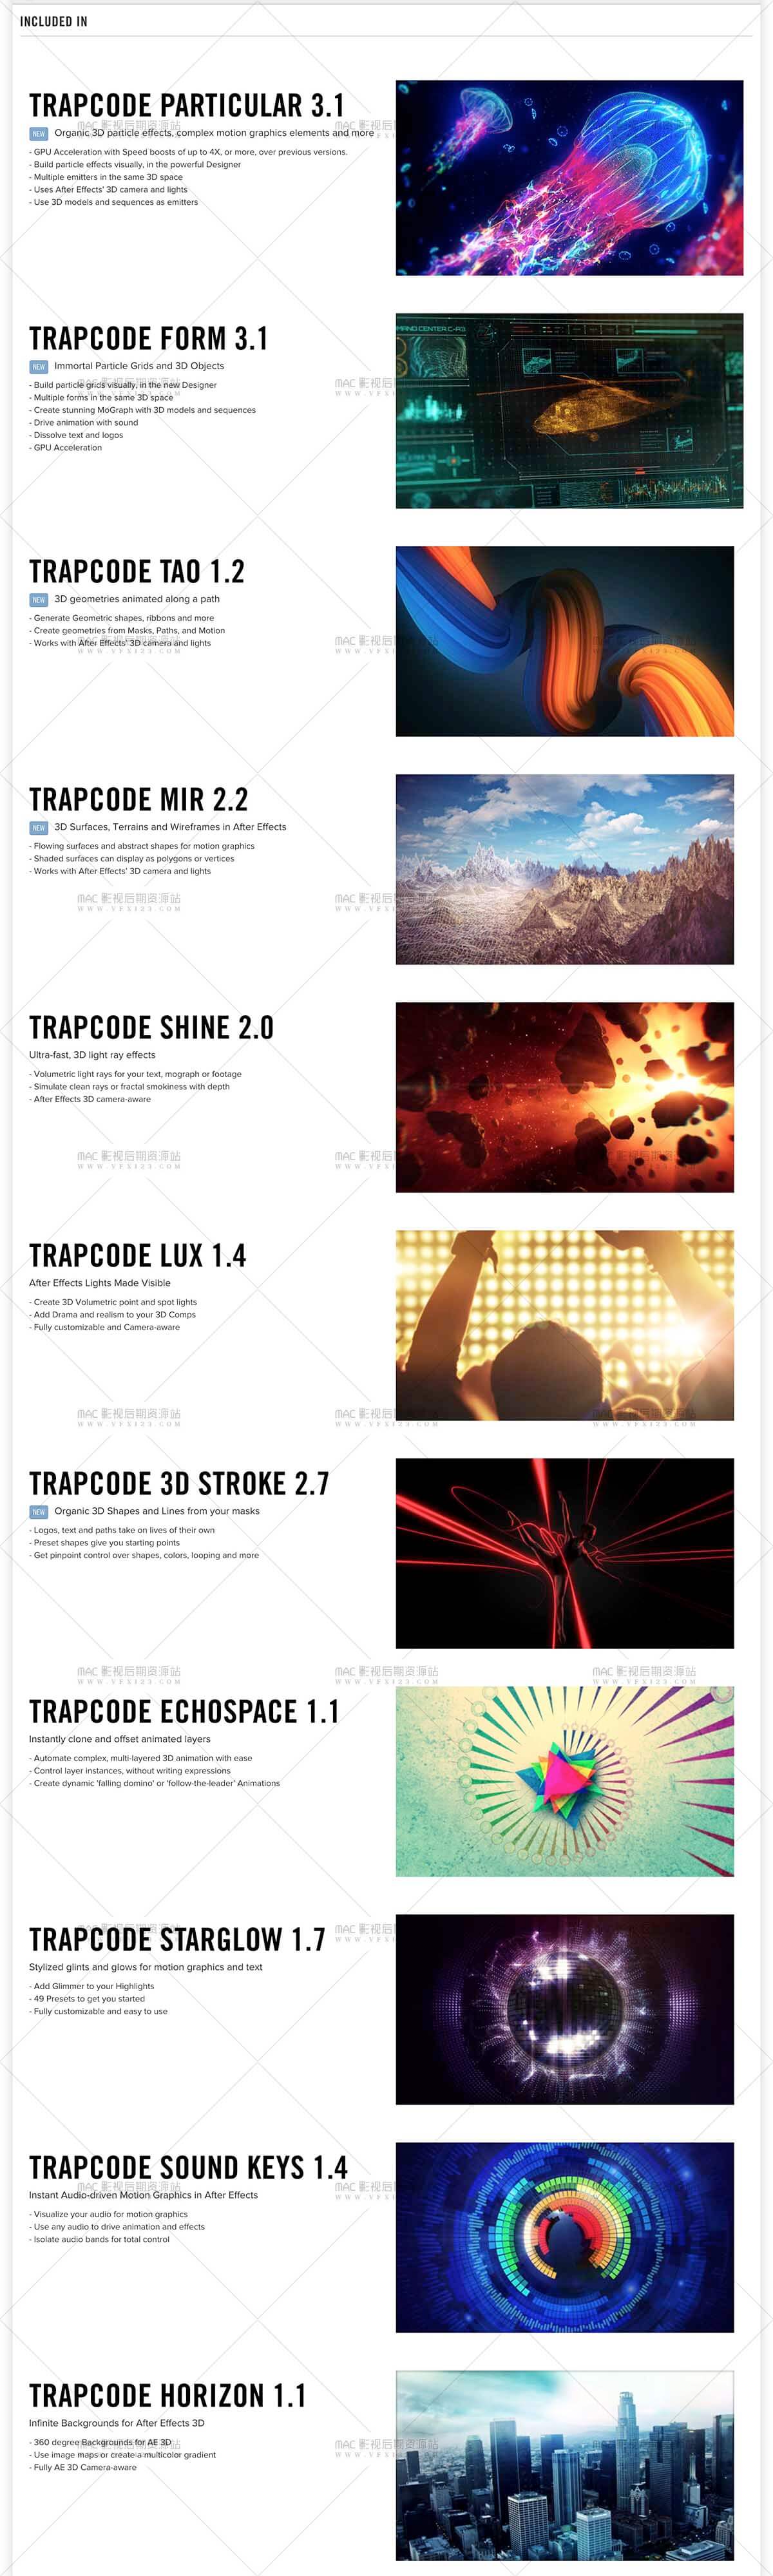 red giant trapcode suite 14